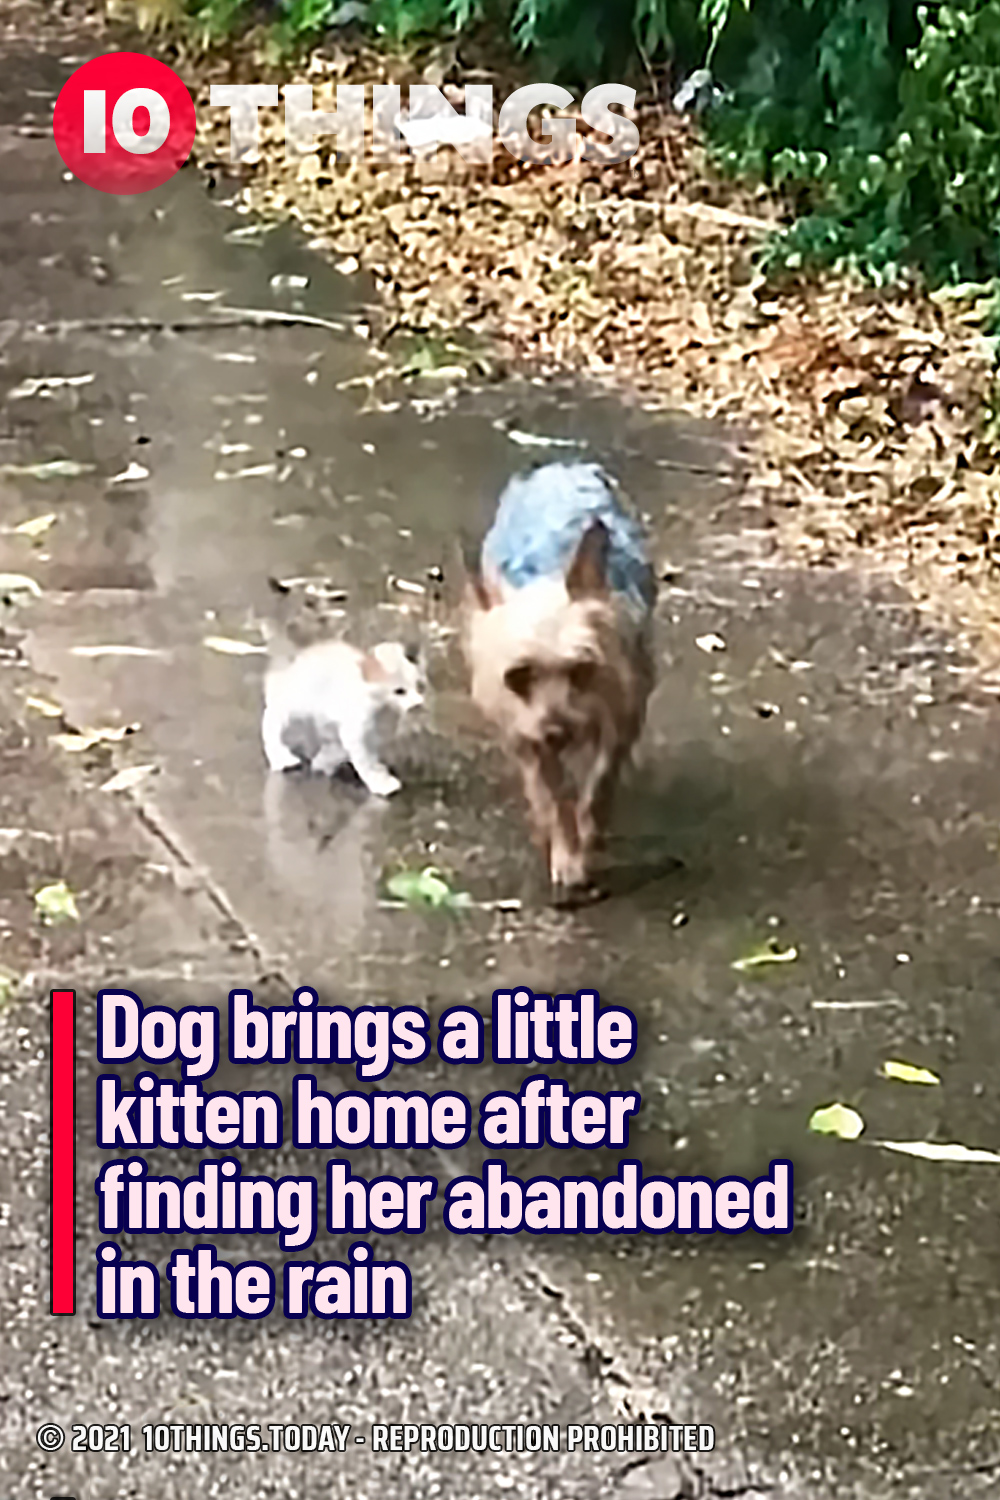 Dog brings a little kitten home after finding her abandoned in the rain